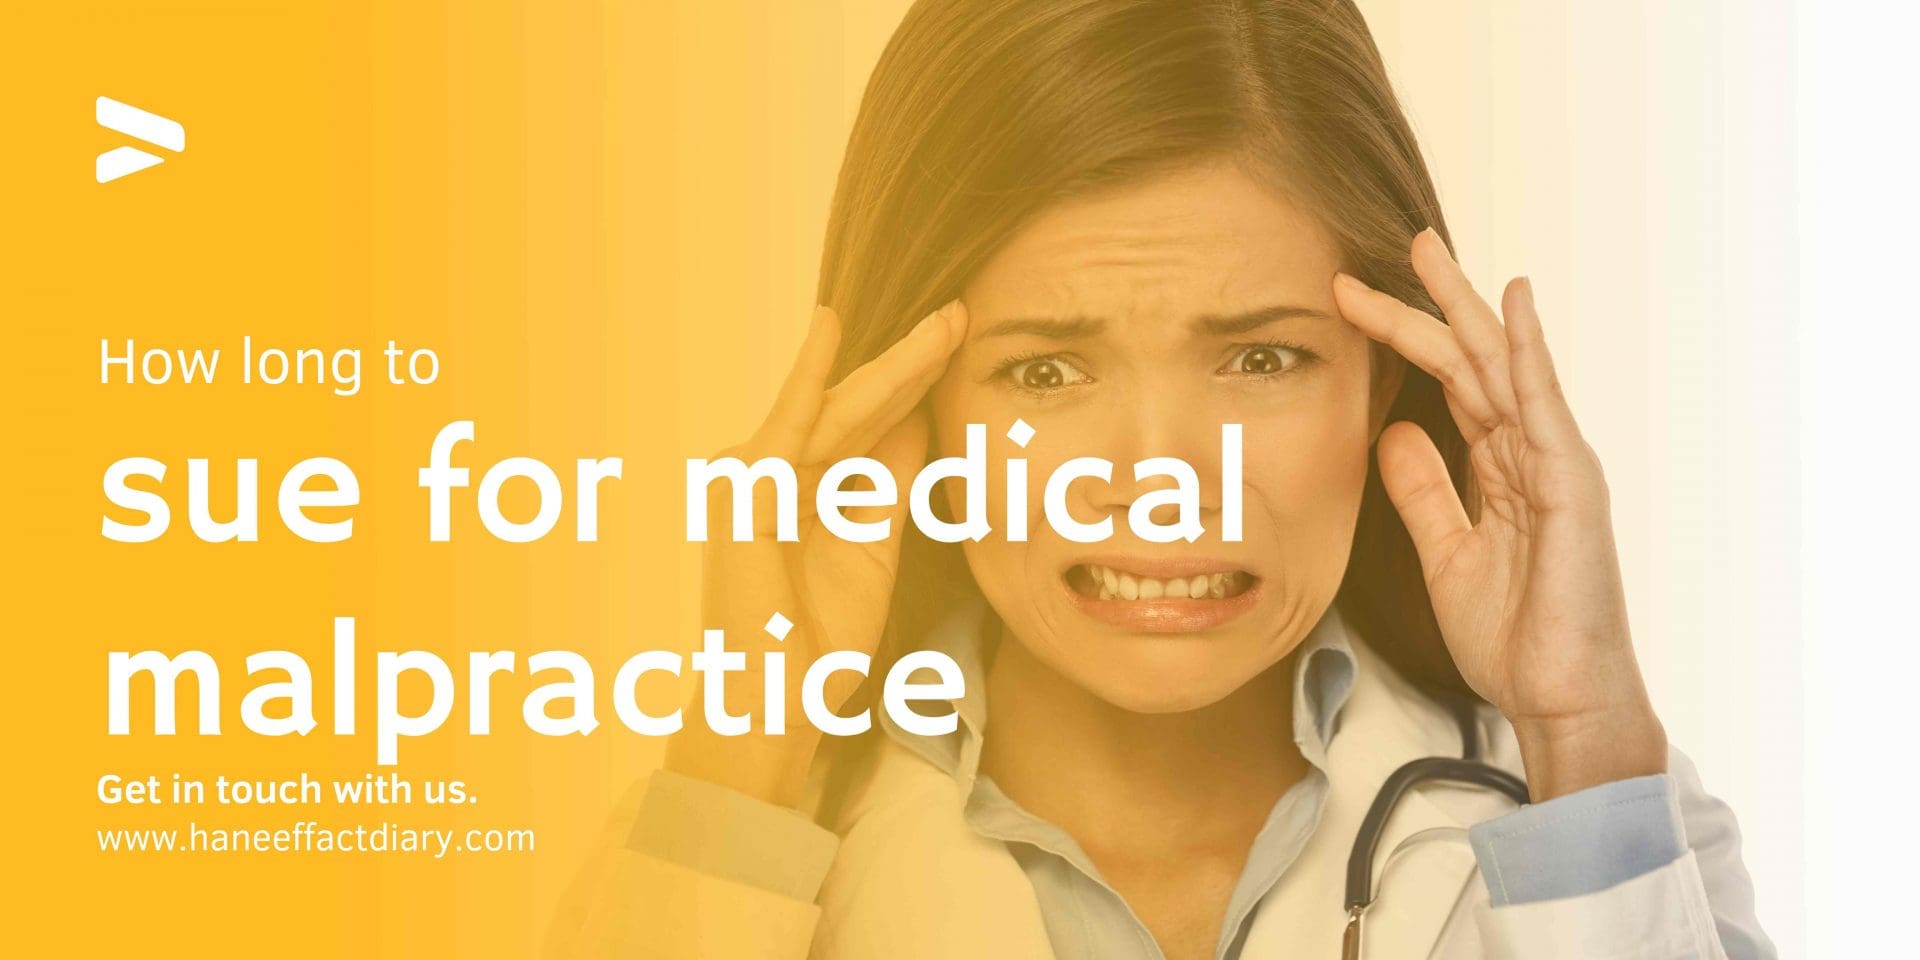 How long to sue for medical malpractice 2022